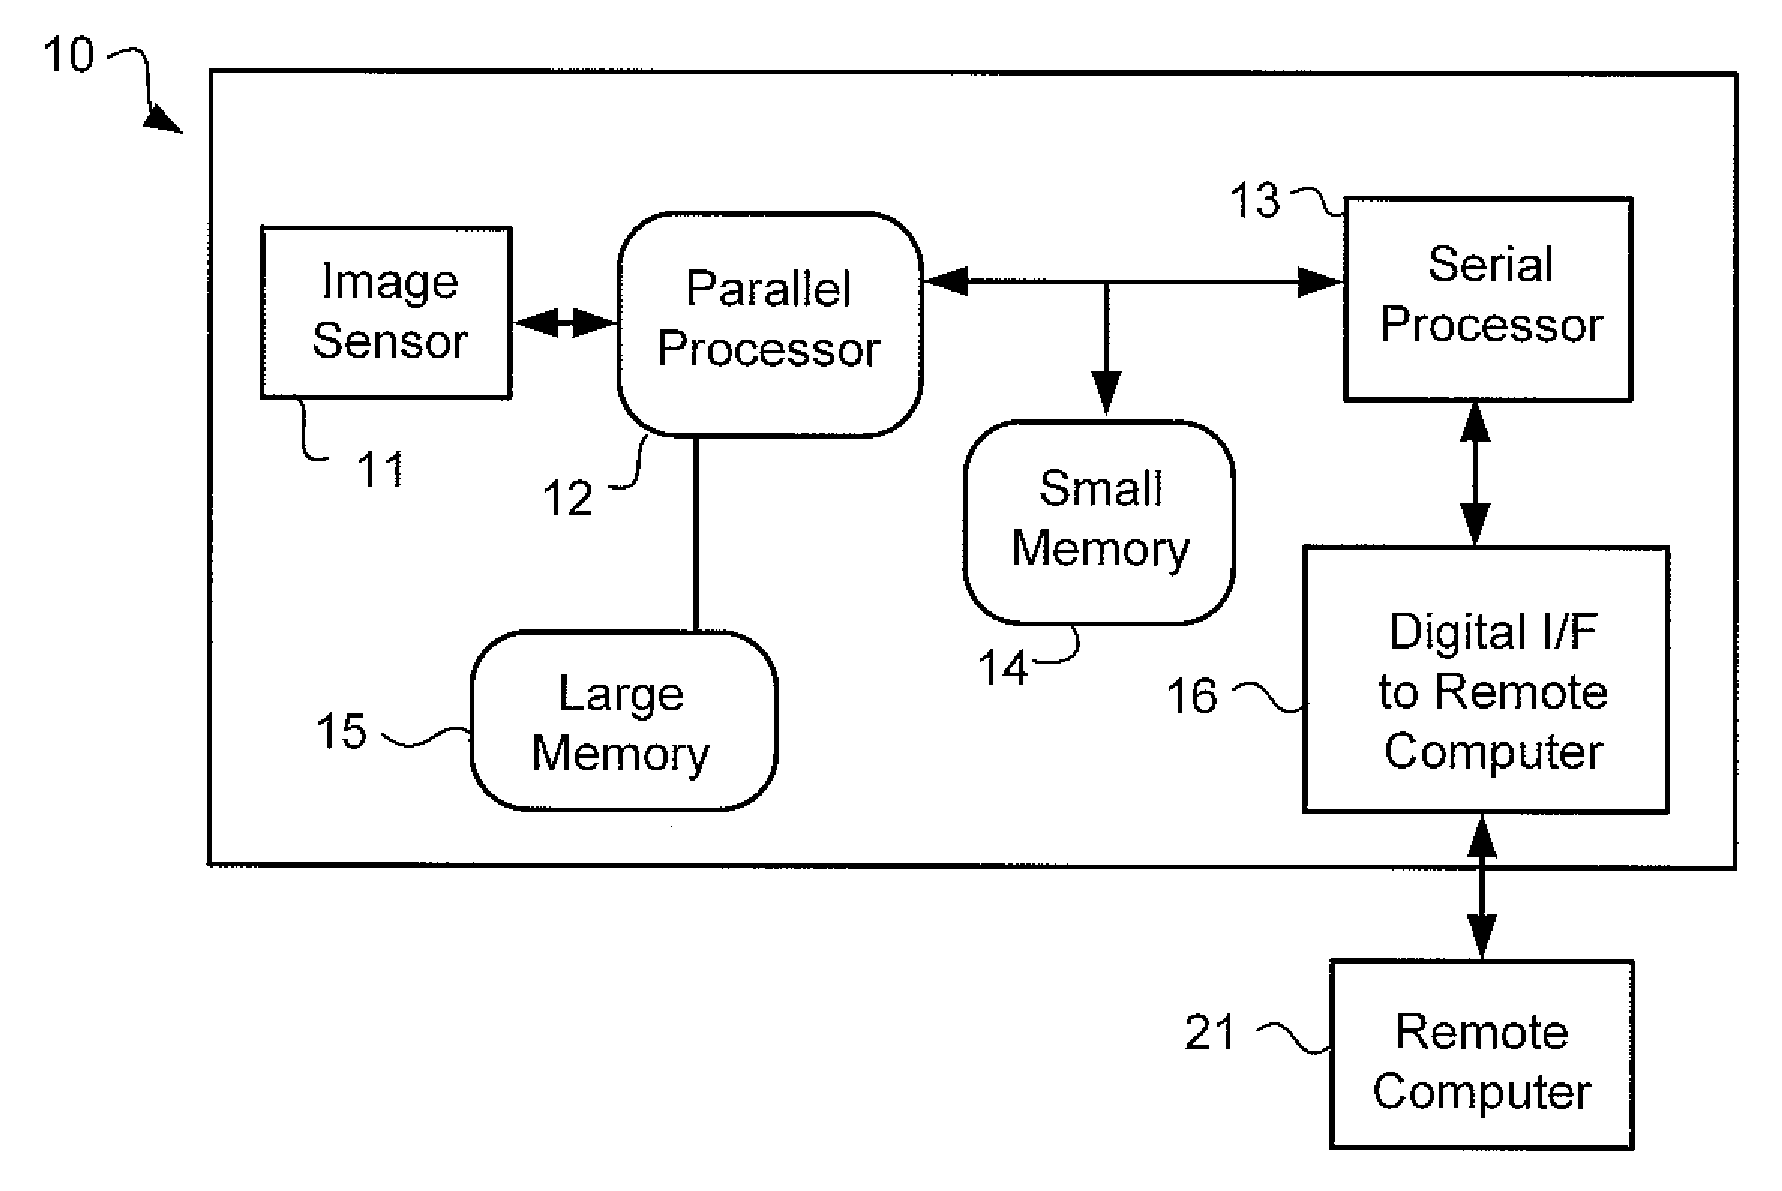 System and Method of High-Speed Image-Cued Triggering